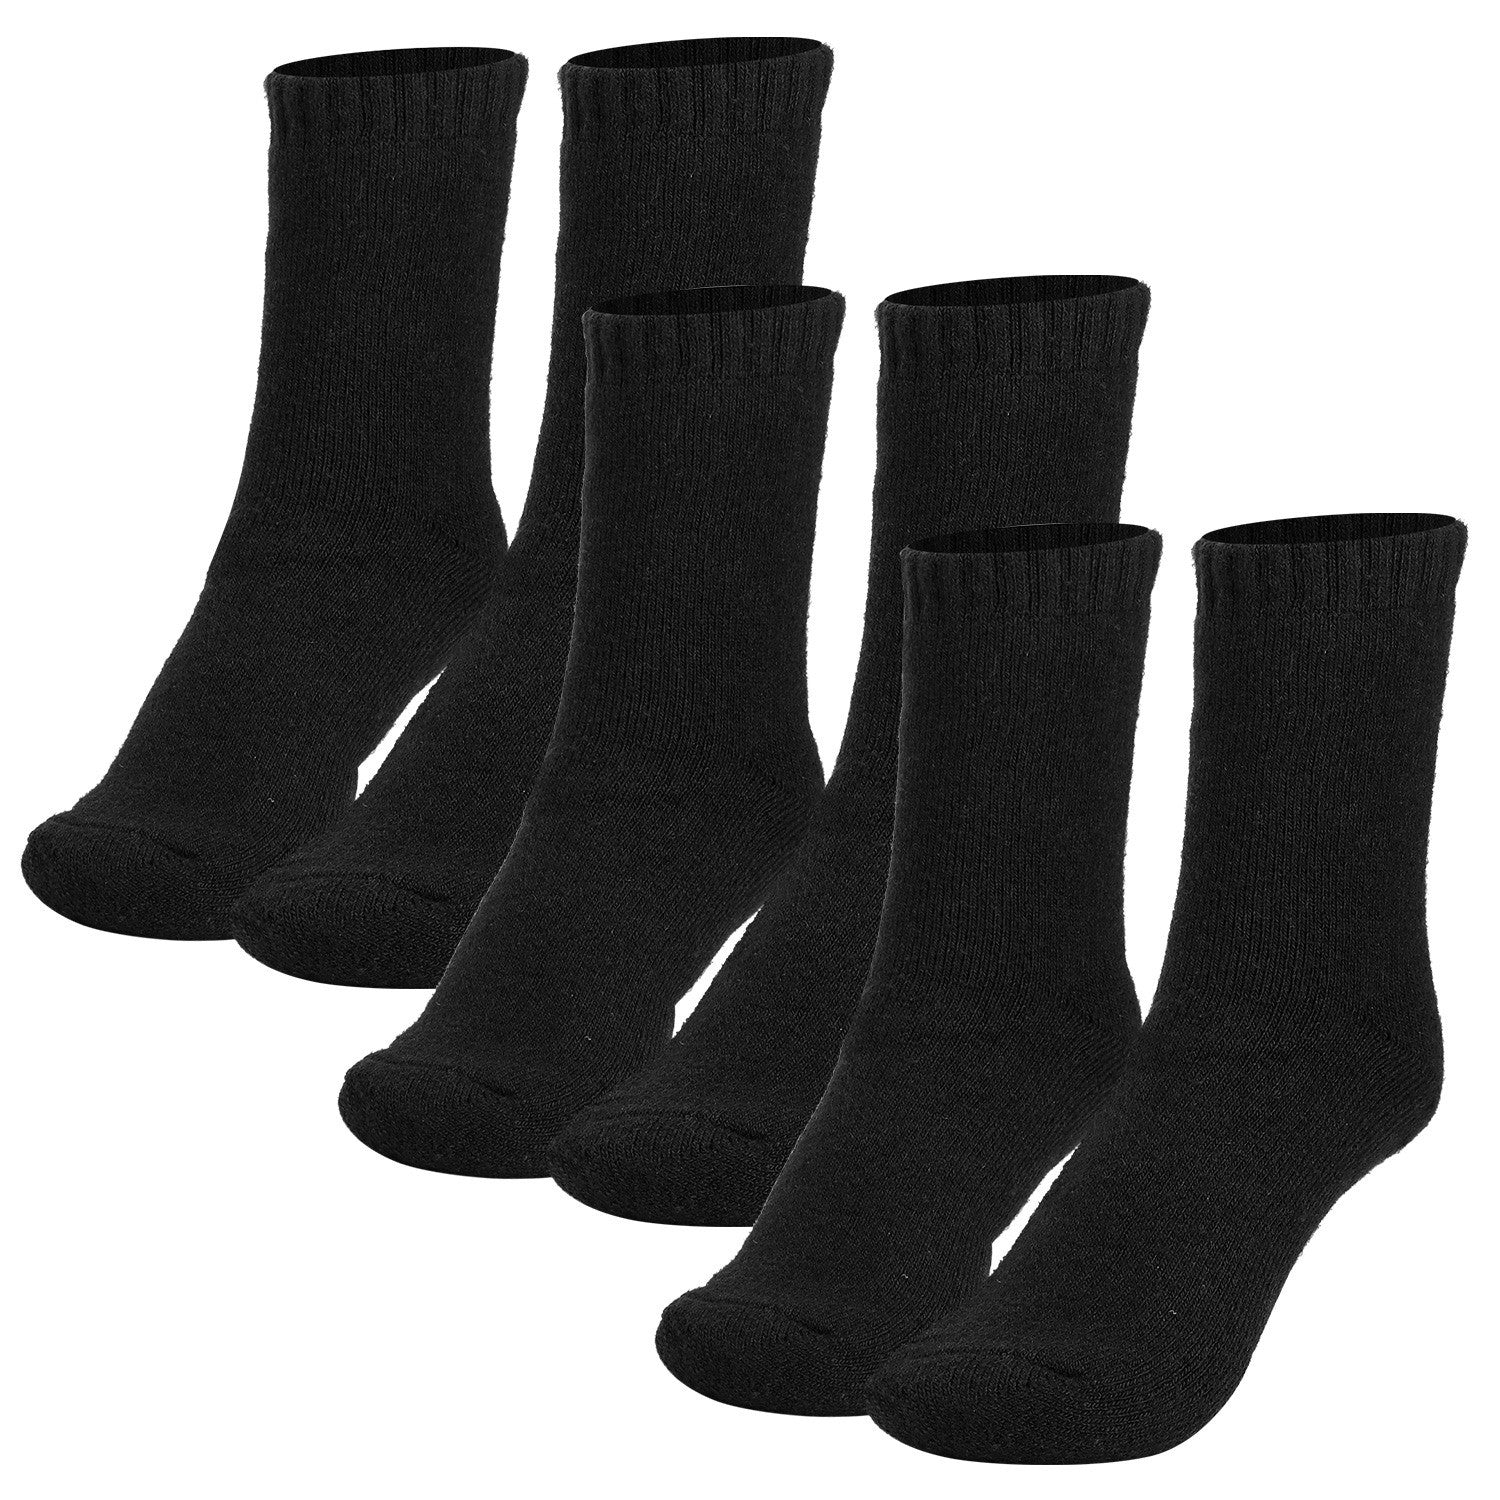 3 Pairs Men Warm Wool Socks Soft Cozy Winter Thermal Socks For Men Thick Heat-Trapping Moisture Wicking Socks